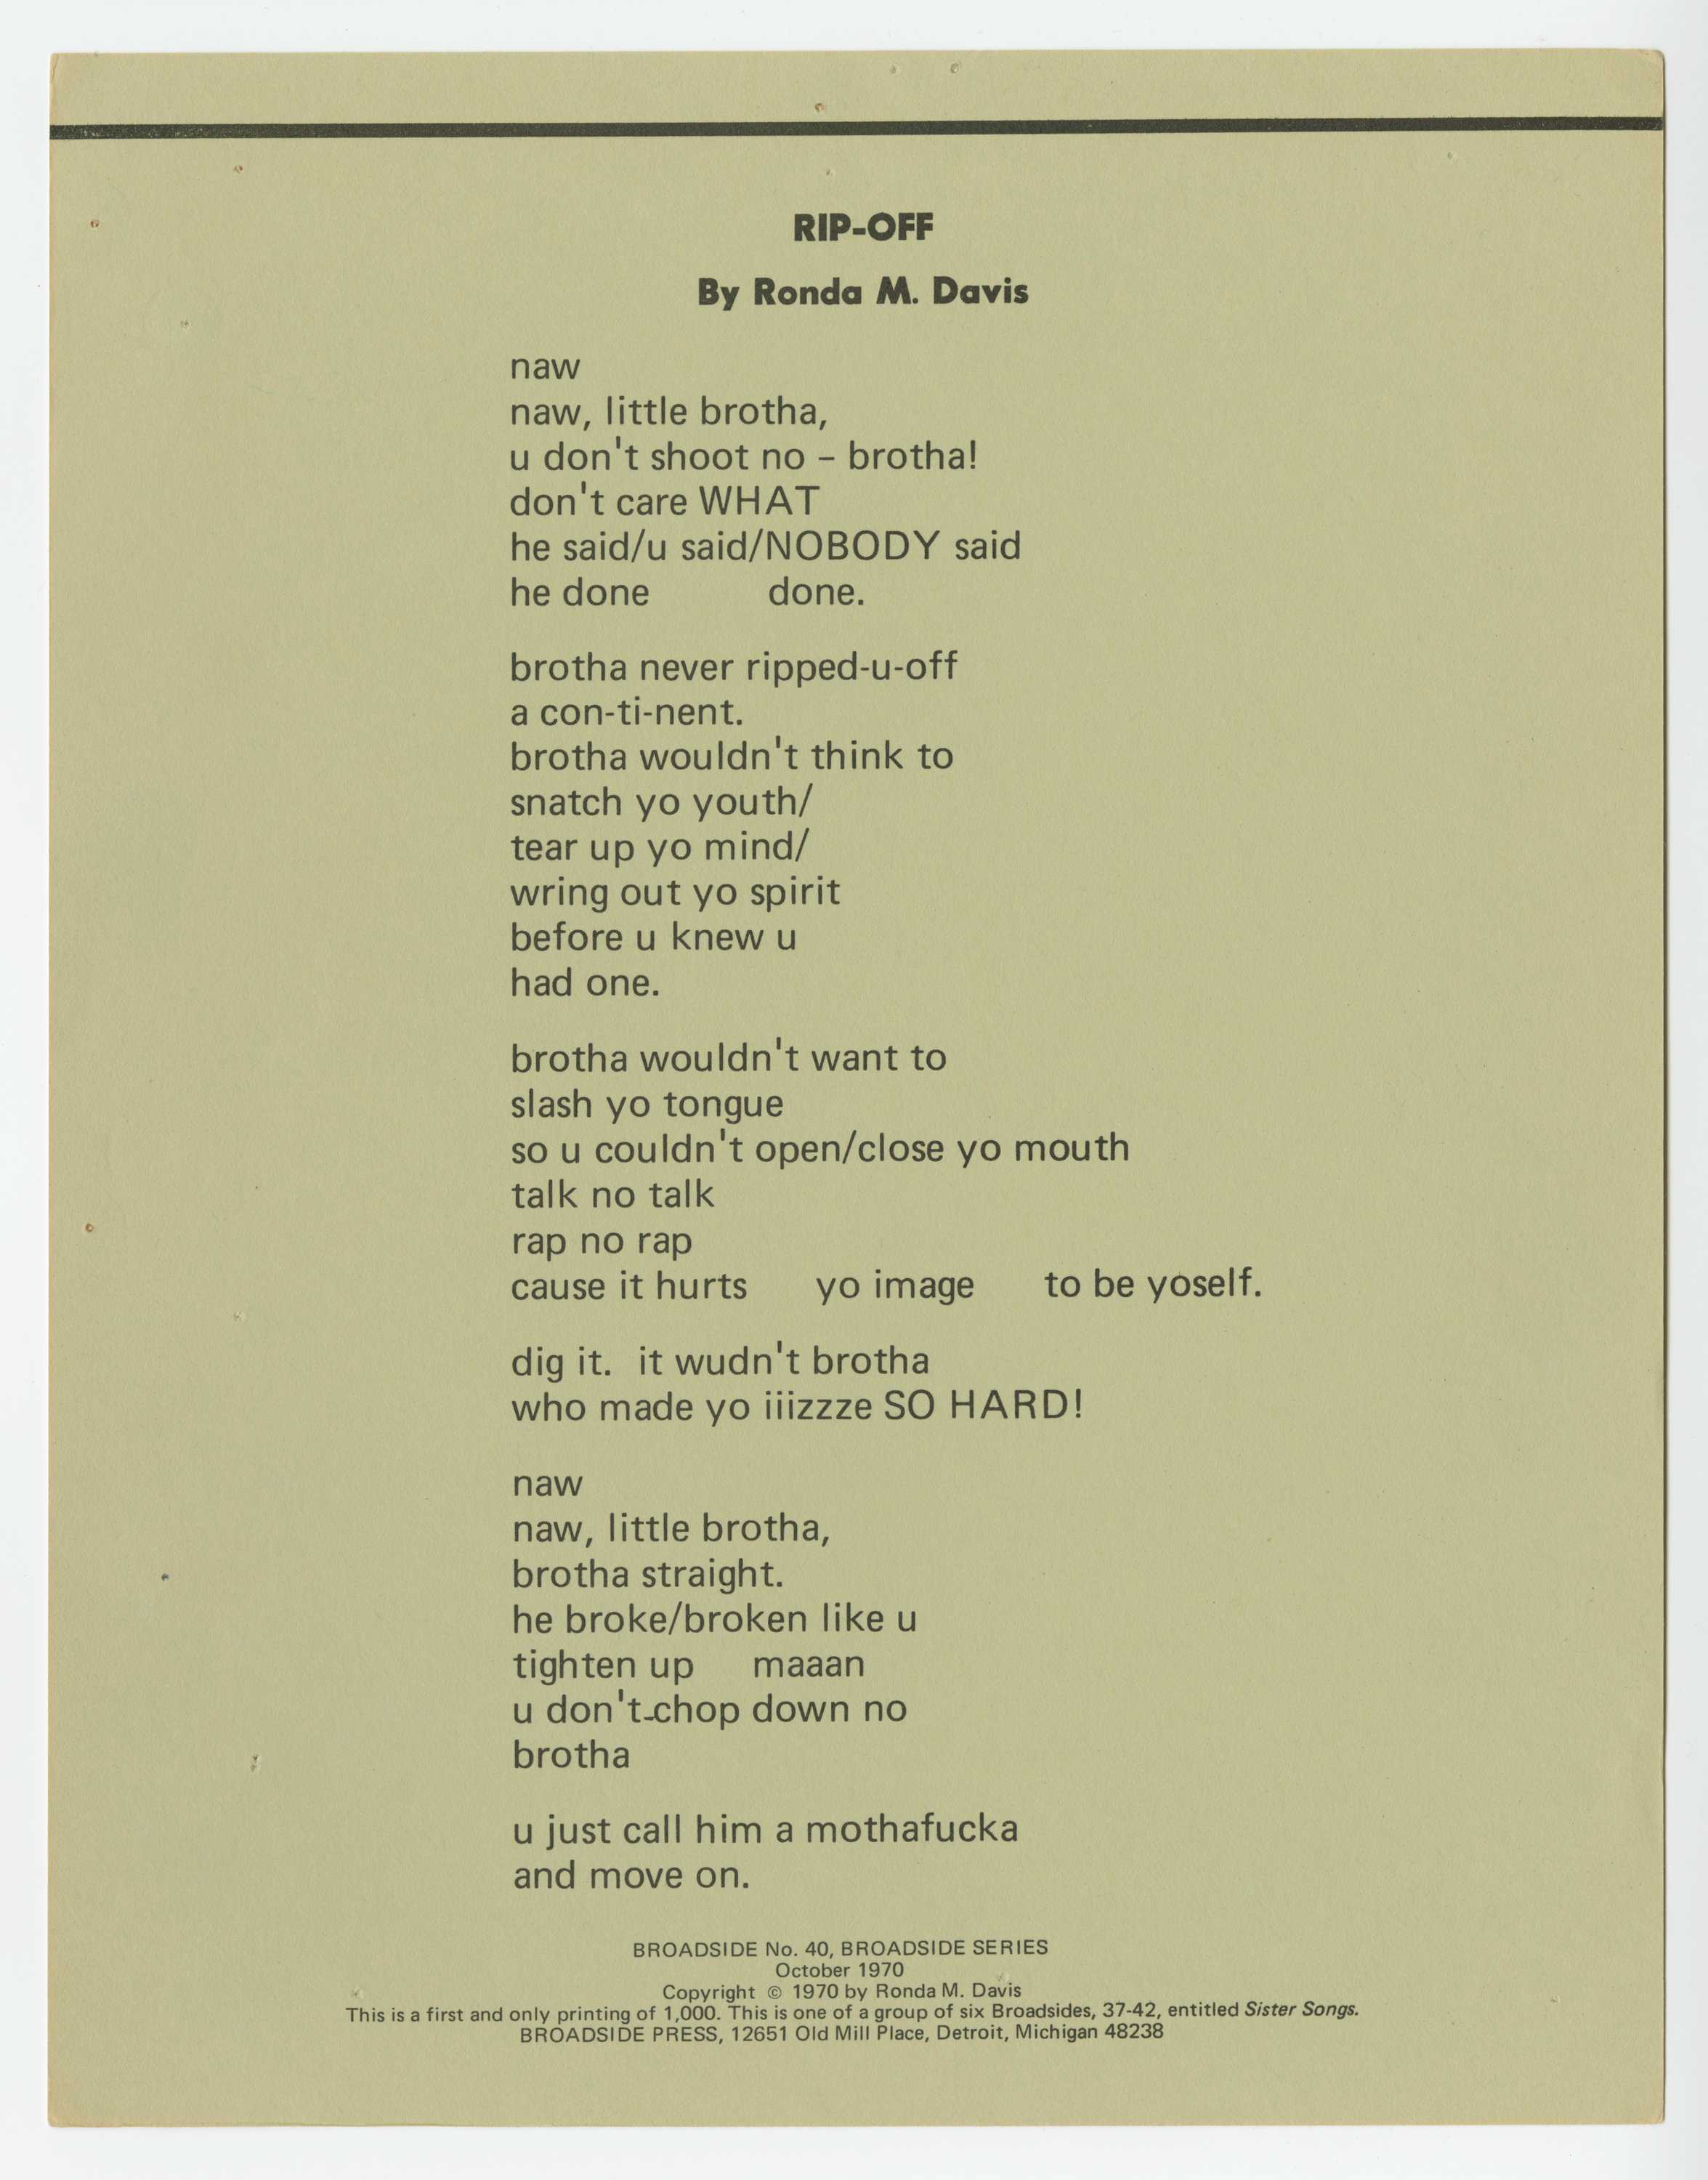 A poem titled Rip-Off written by Ronda M. Davis and published by Broadside Press as Broadside No. 40. The poem is on green paper and printed in black ink. A horizontal black line runs across the top of the page. The copyright, broadside number, and publisher information is at the bottom of the page. The back side of the poem is blank.